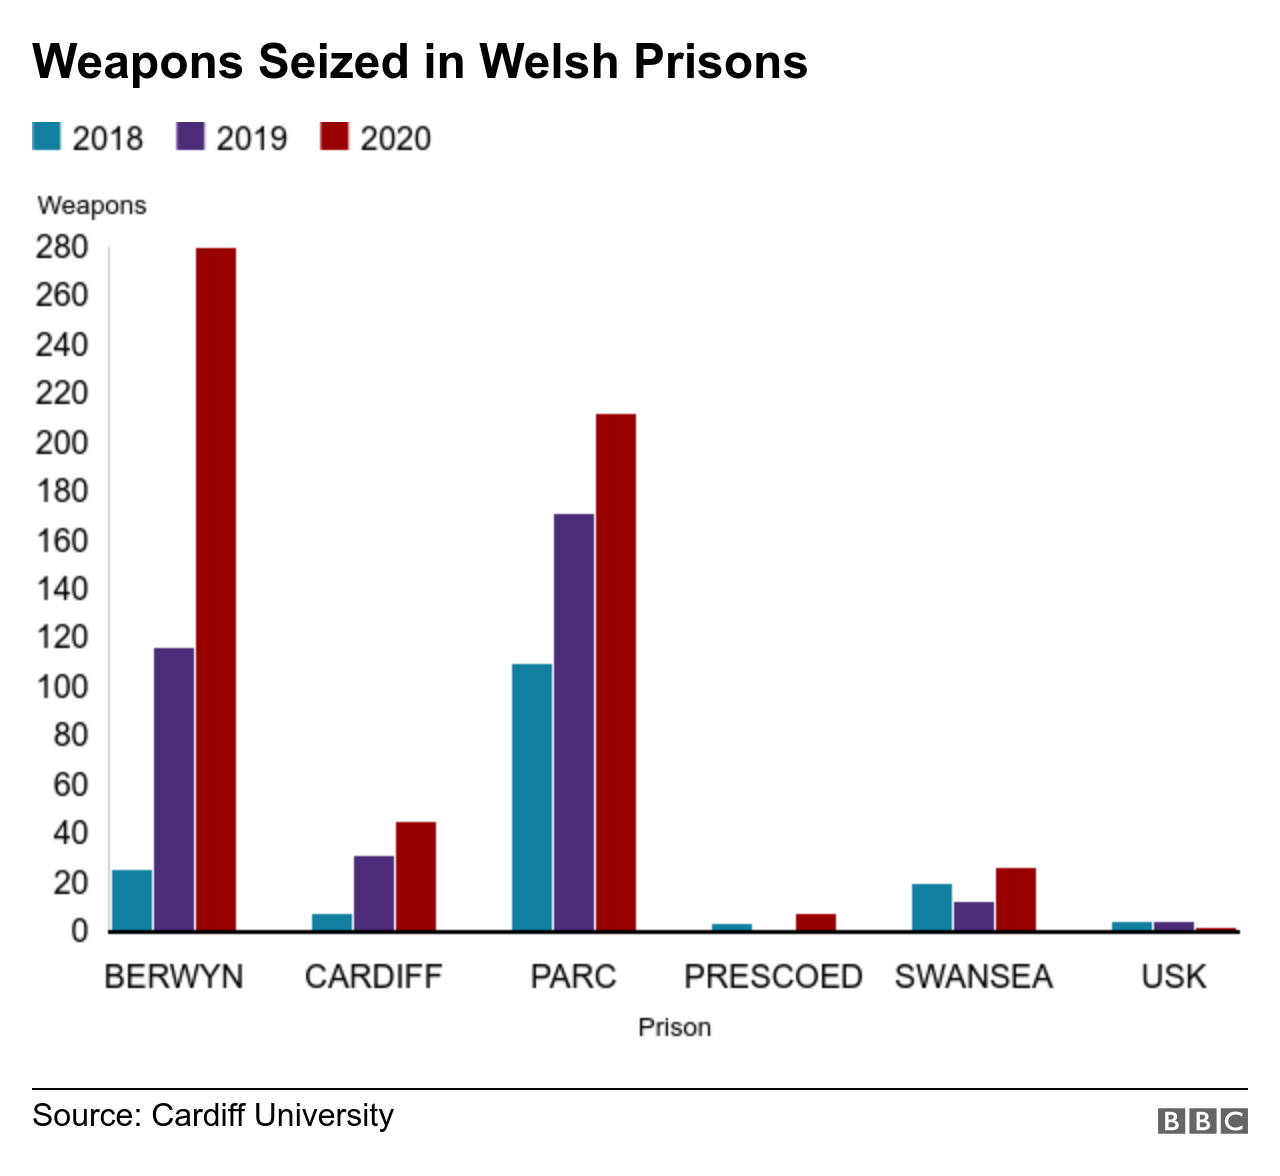 Graph showing number of weapons seized in Welsh prisons 2018-2020